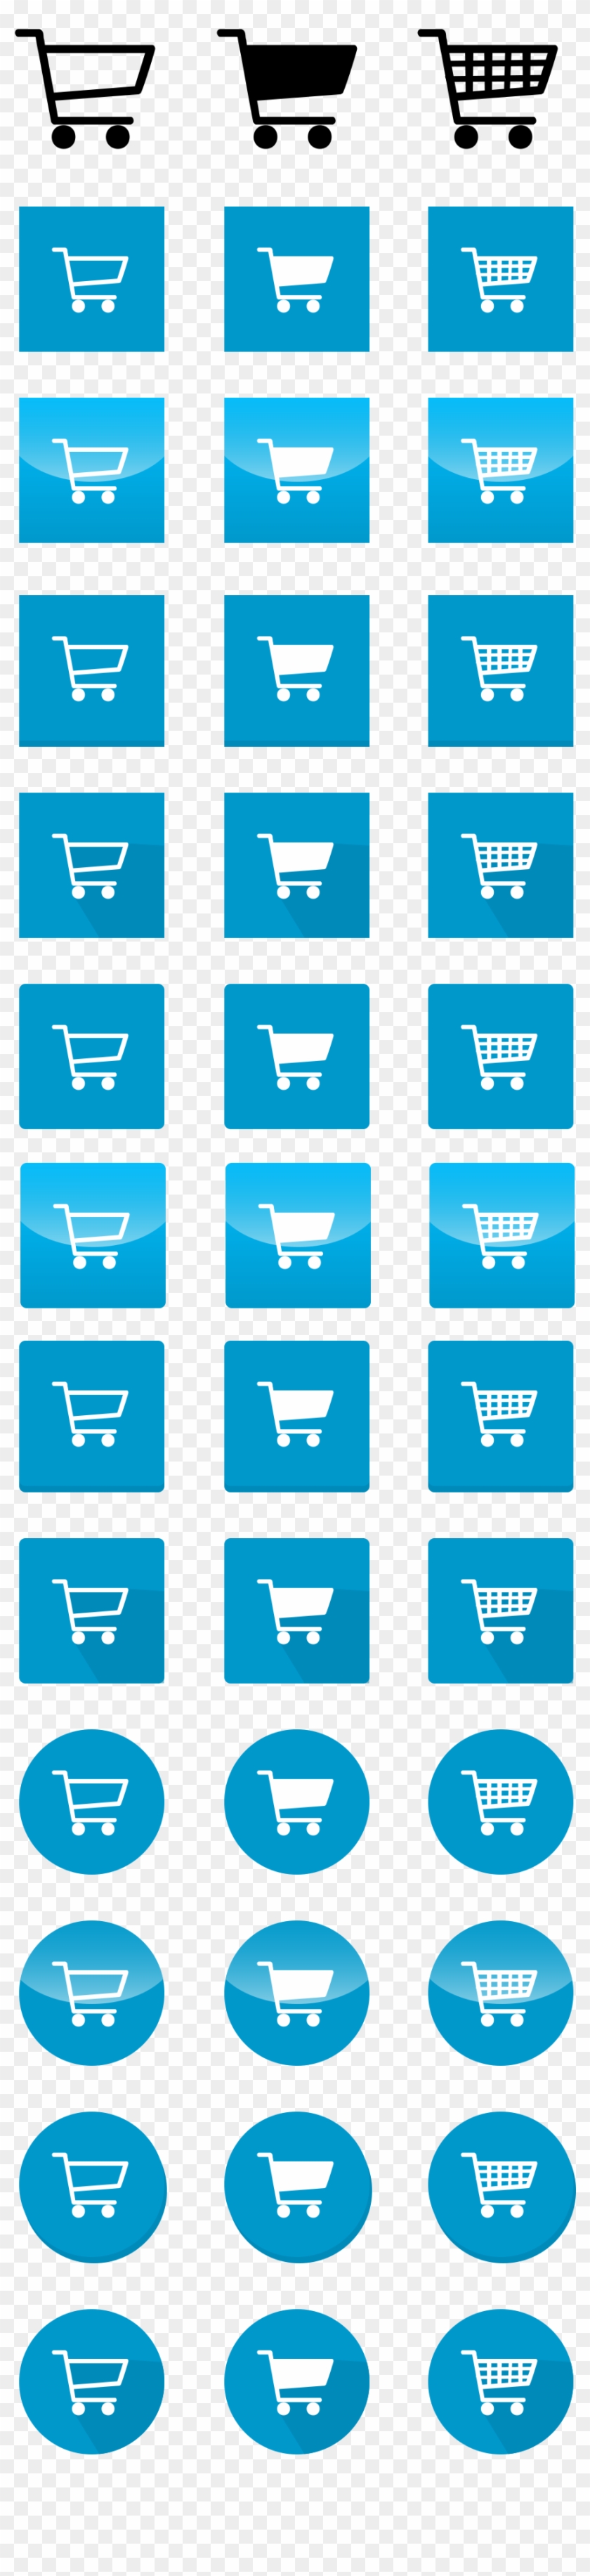 Free Cart Icon Vector Graphic Pack - Icon Font Free Circle Clipart #5305430